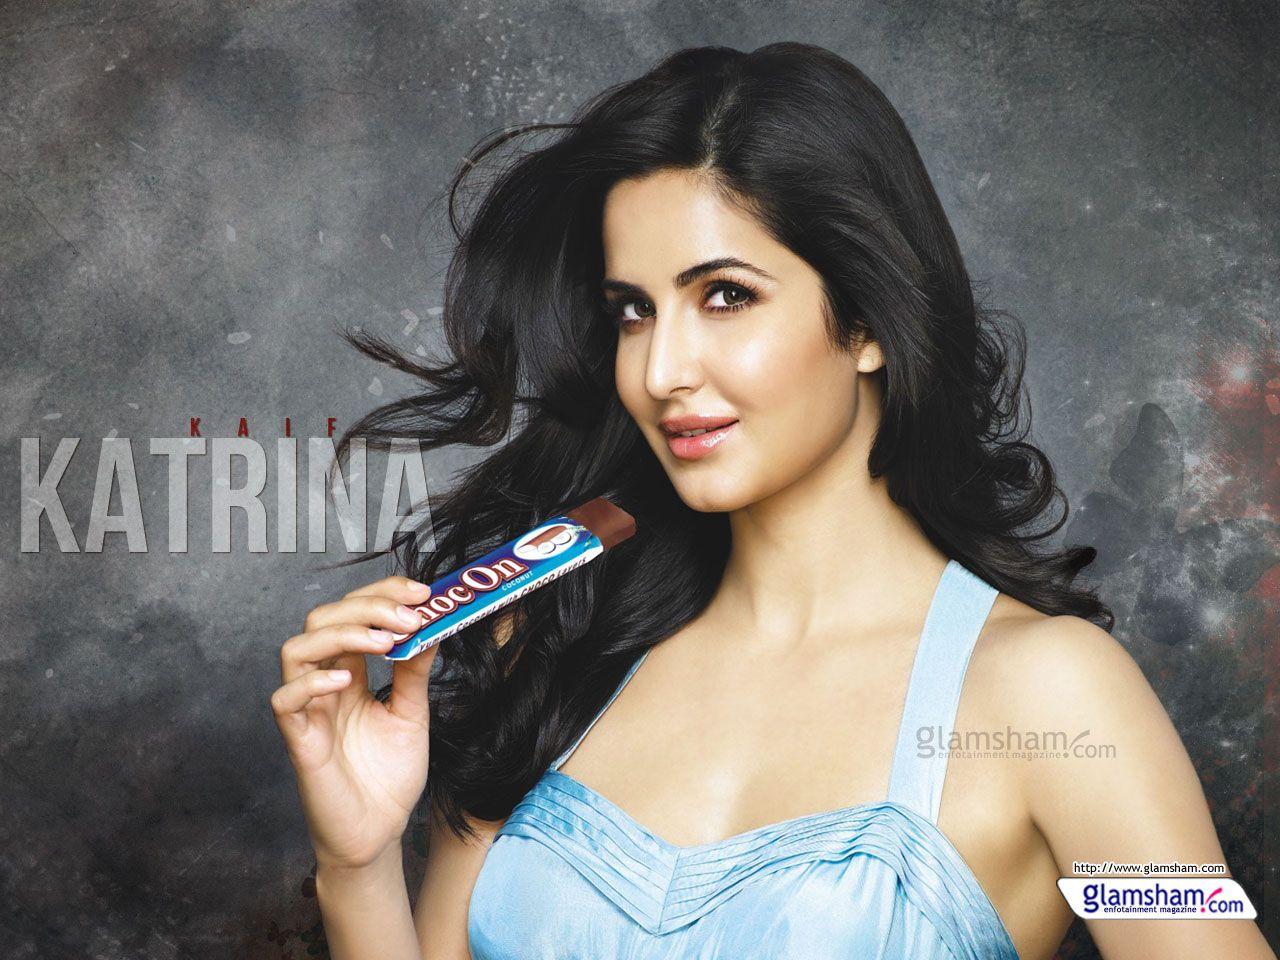 HD Picture: Katrina Kaif, 1280x960 px for desktop and mobile